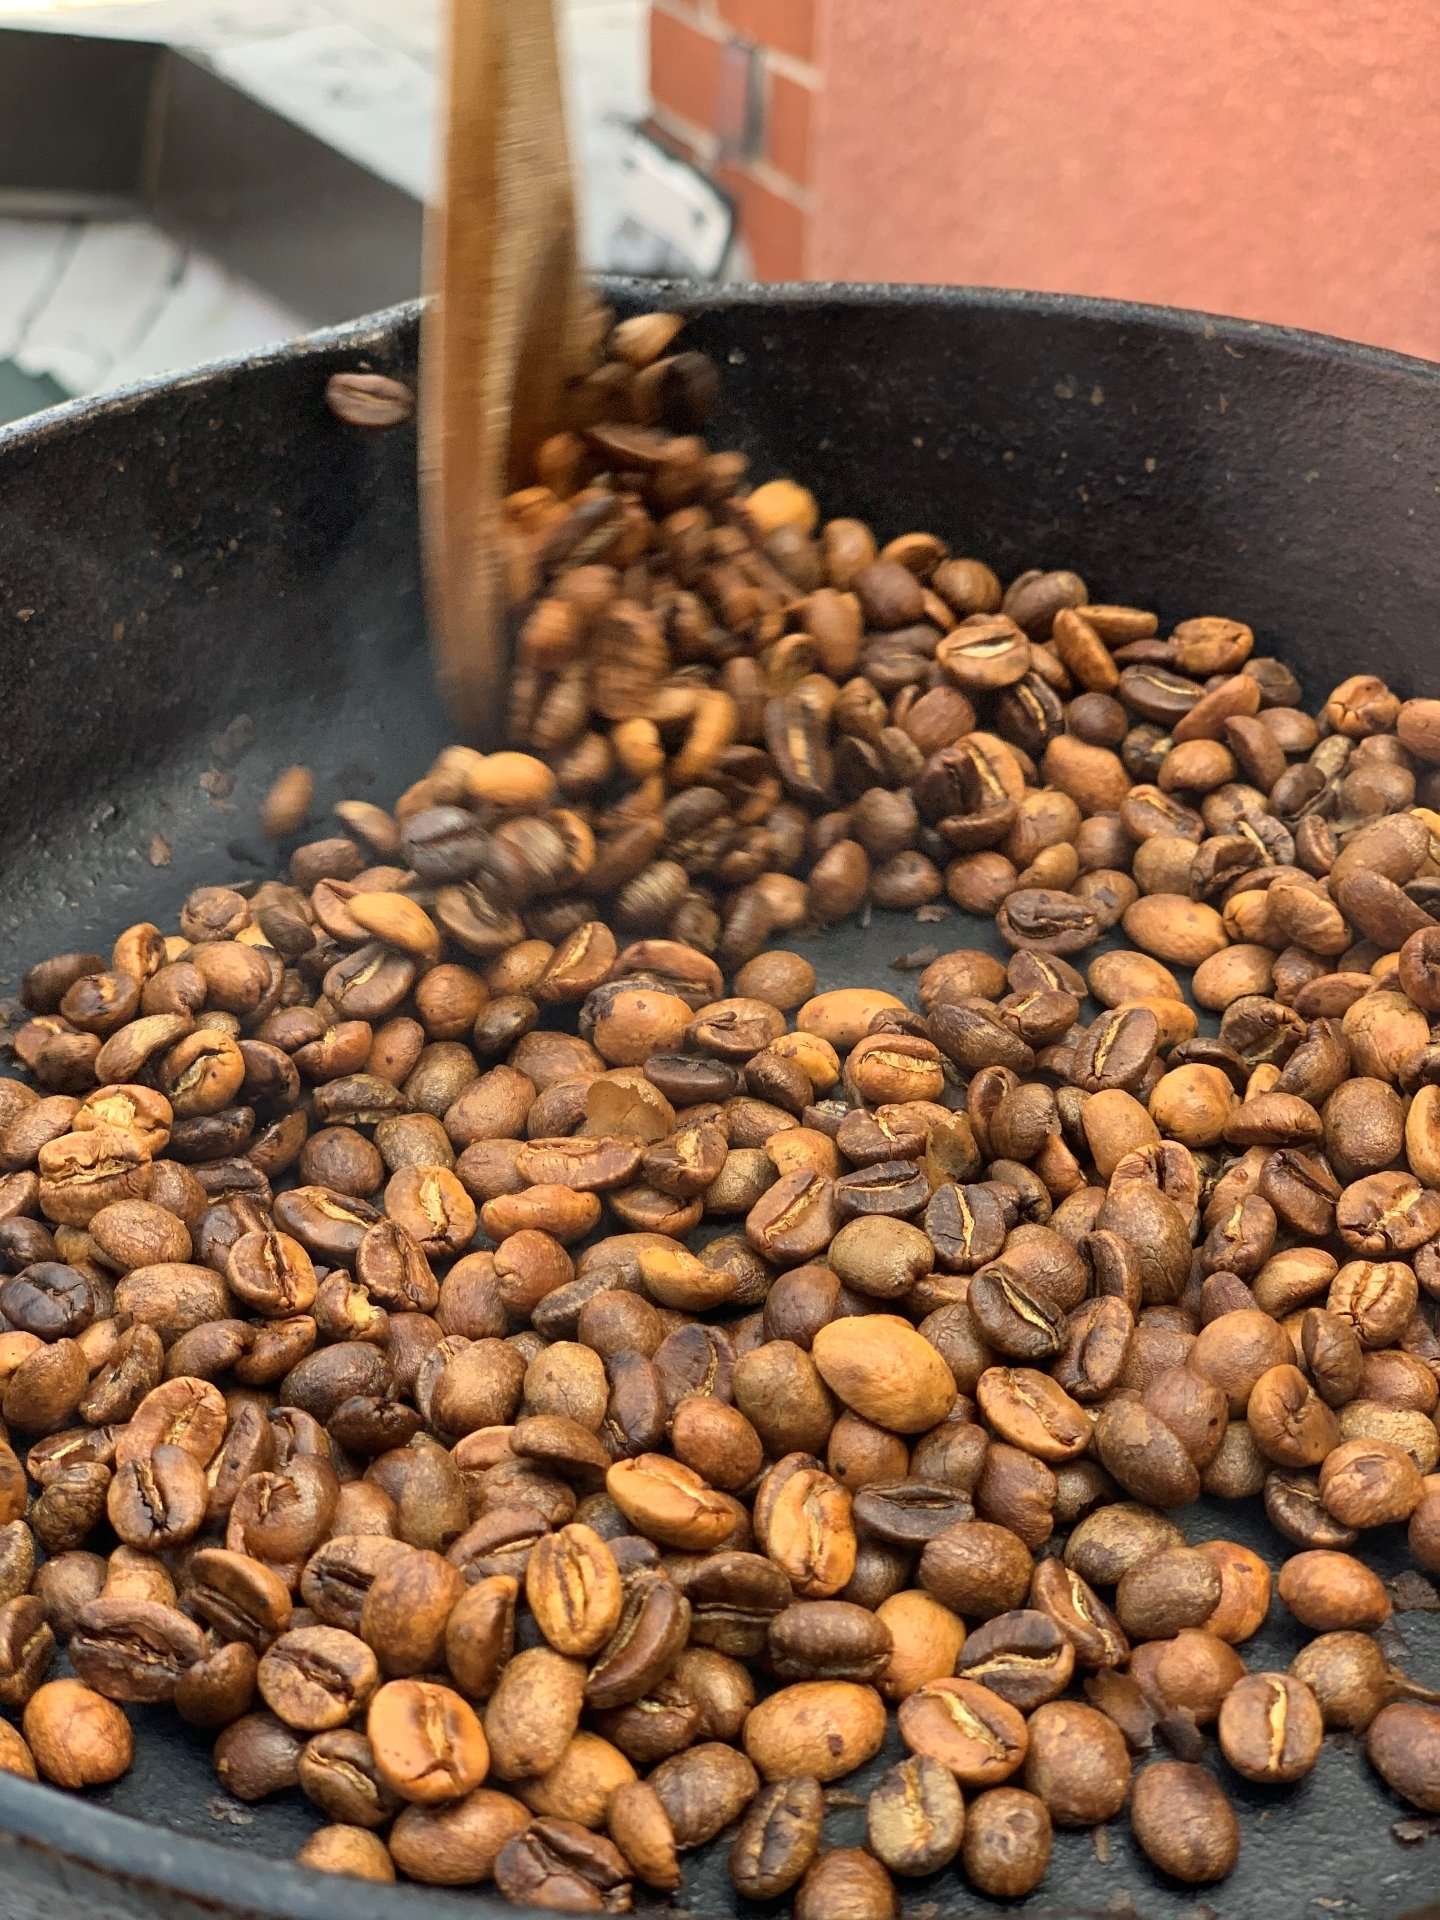 How To Guide for Roasting Coffee at Home